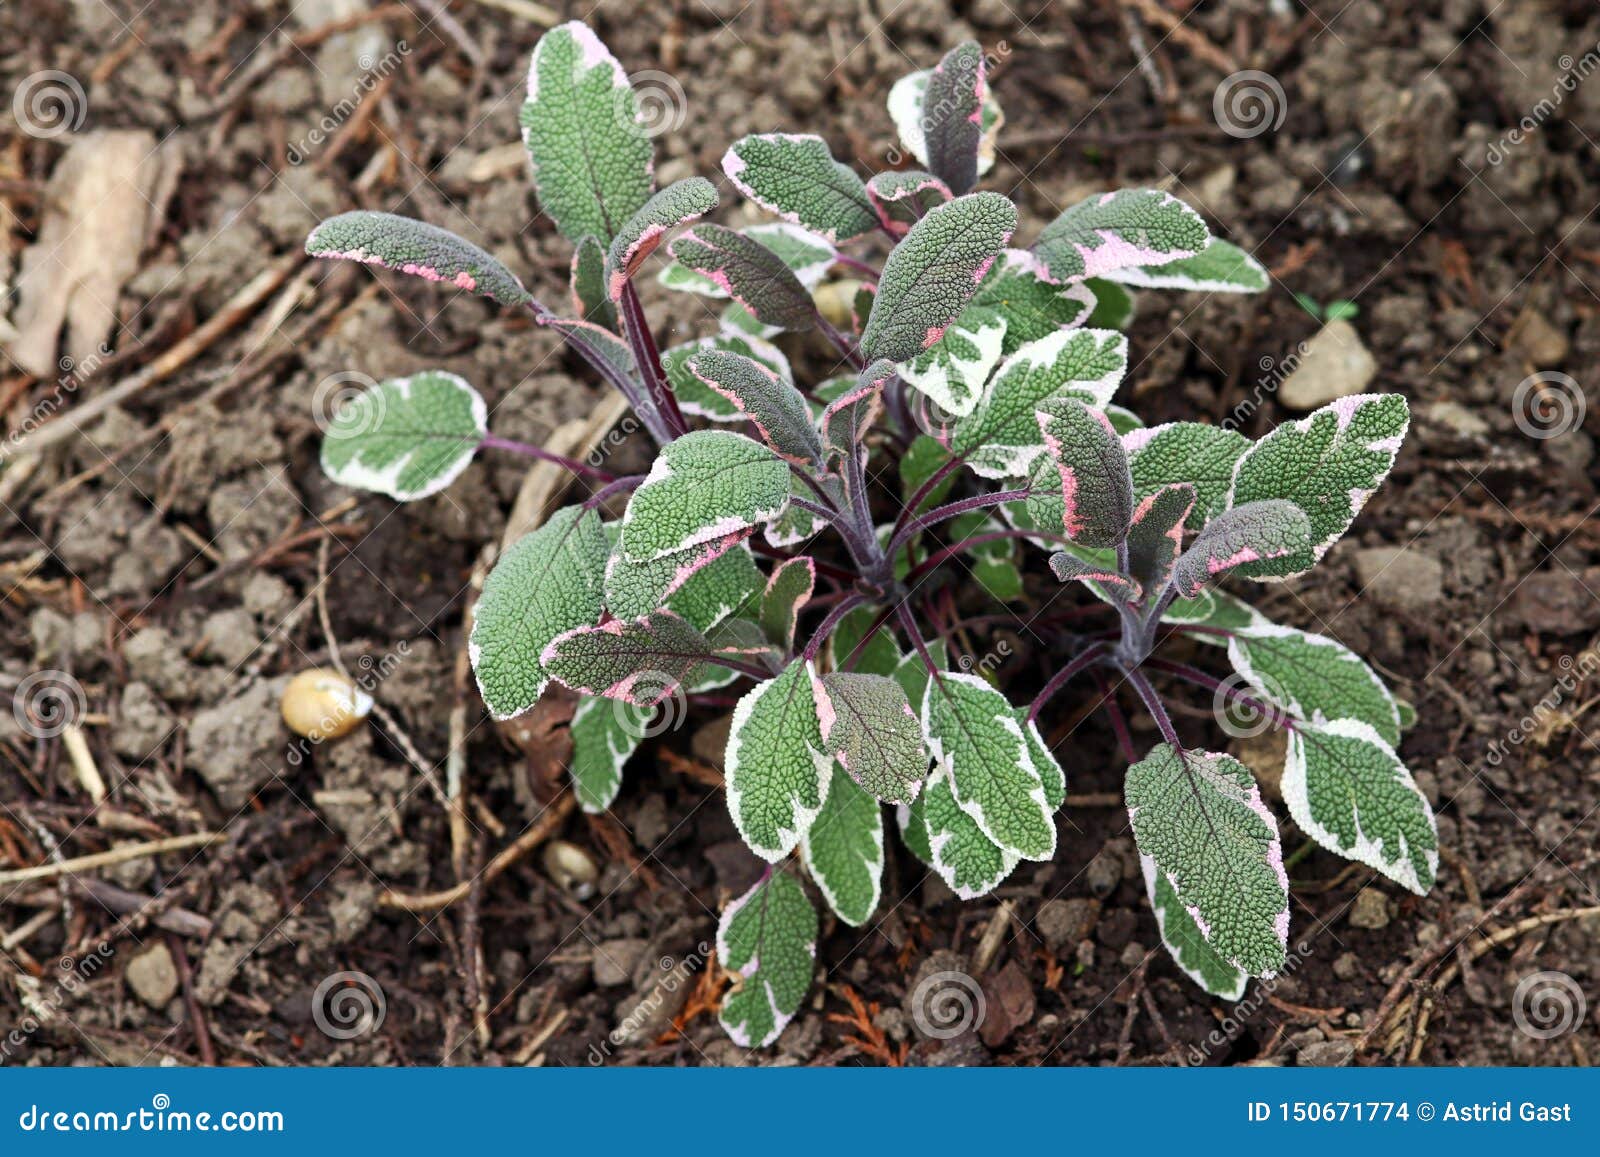 tricoloured sage is beautiful and healthy